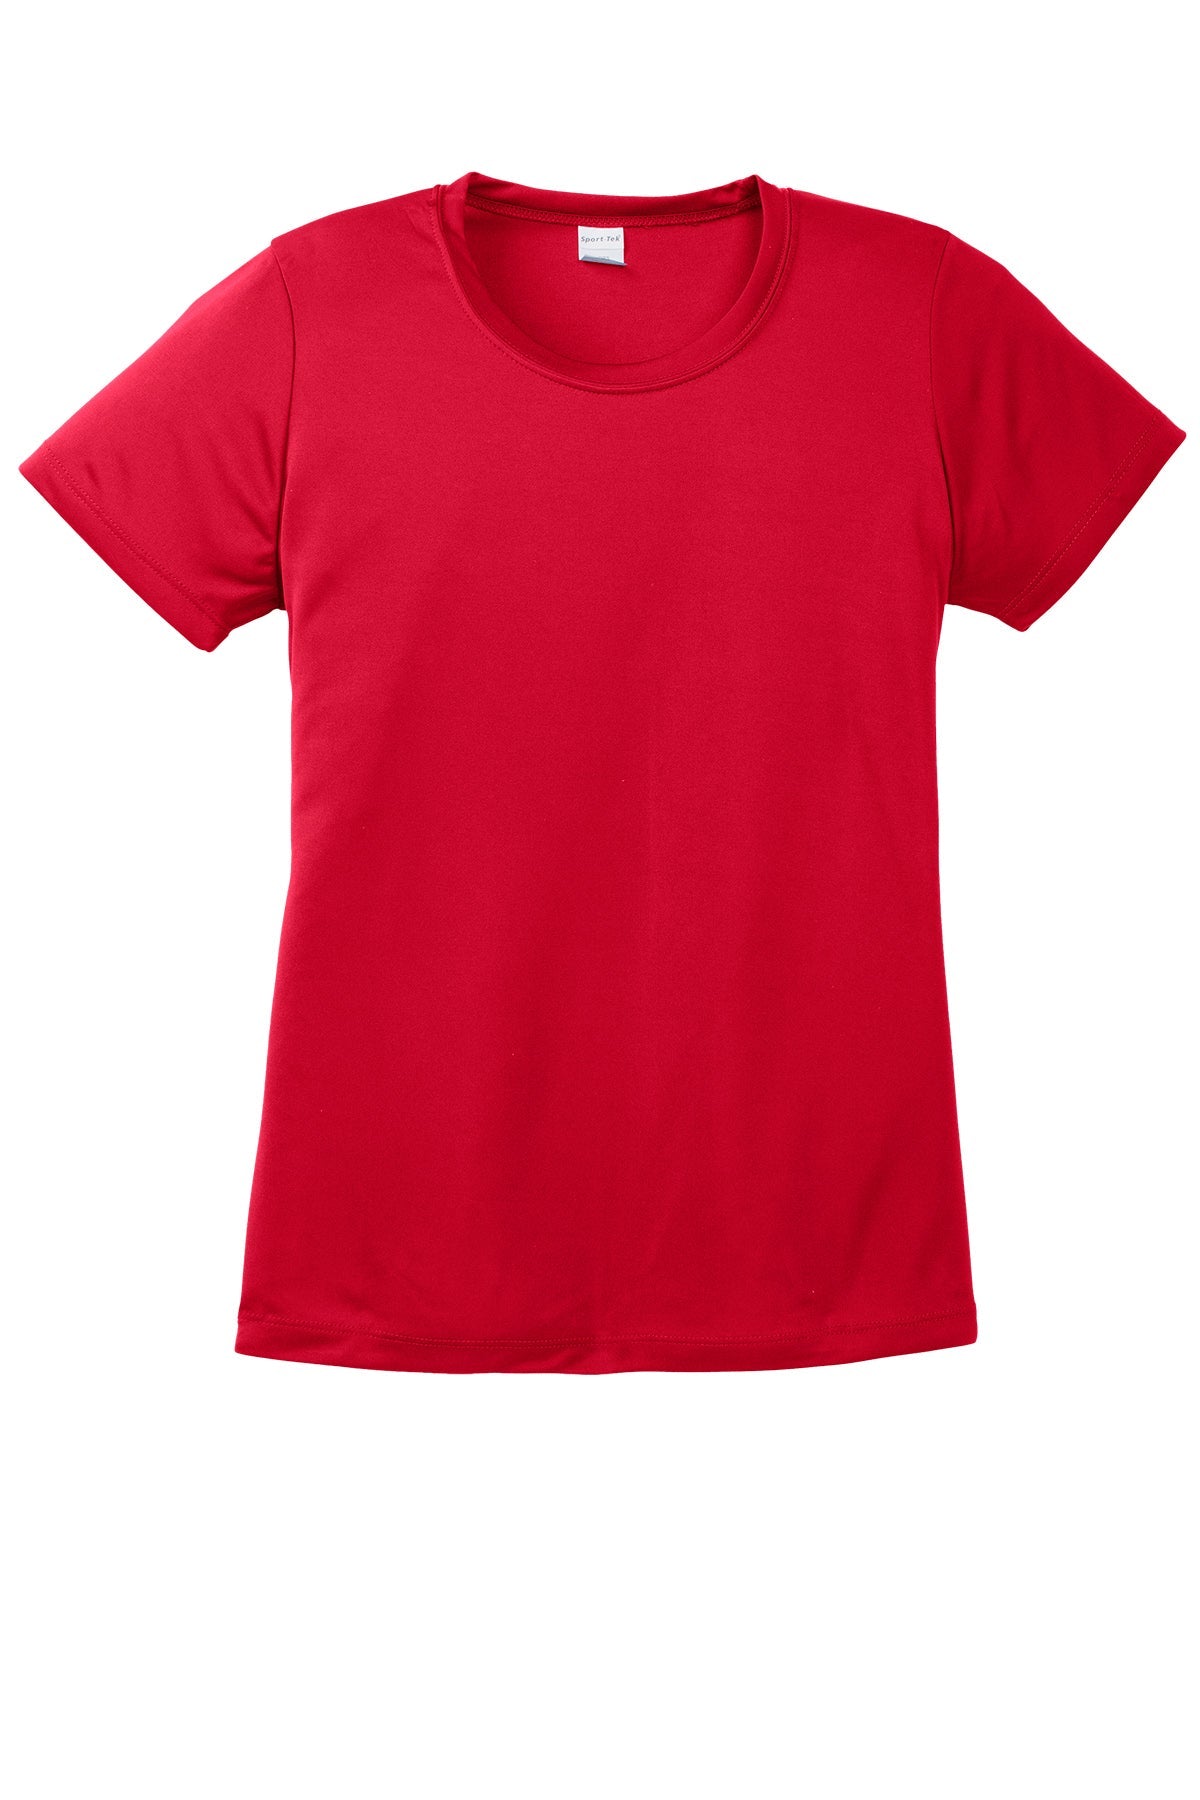 Sport-Tek Lst350 Polyester Ladies T-Shirt Ad Small / True Red